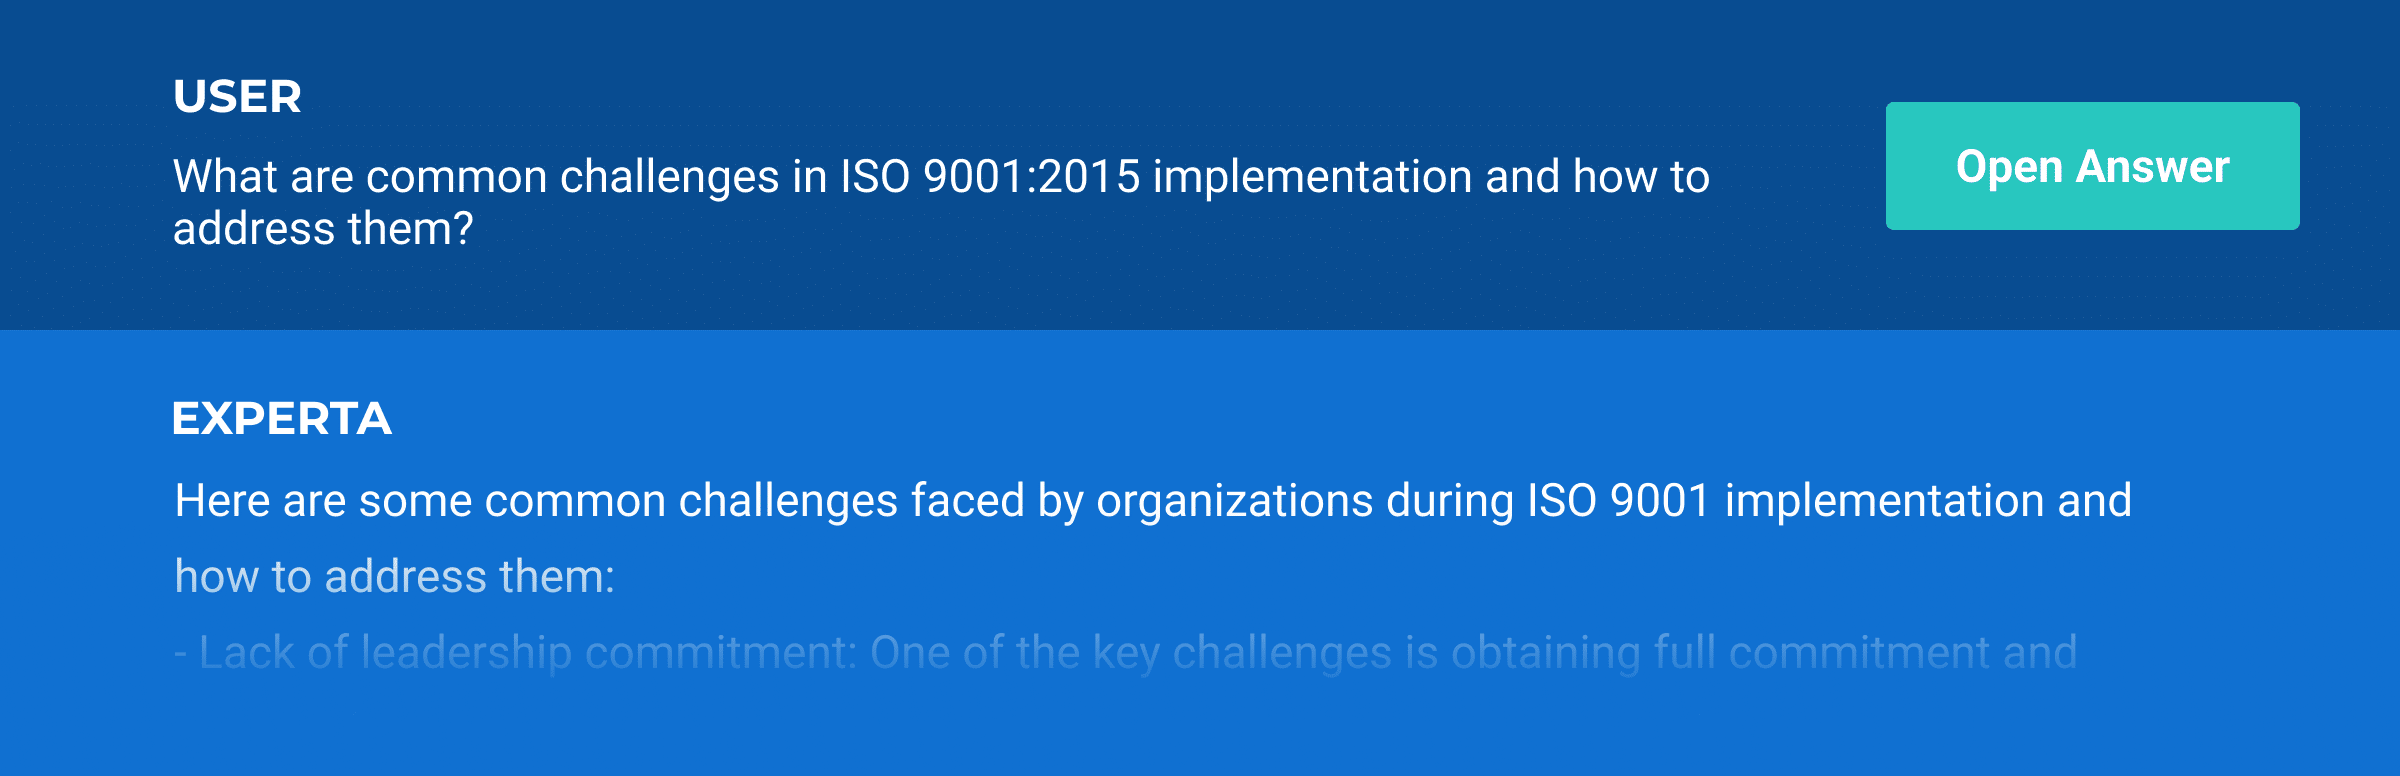 How can AI help ISO 9001 consultants? - Advisera